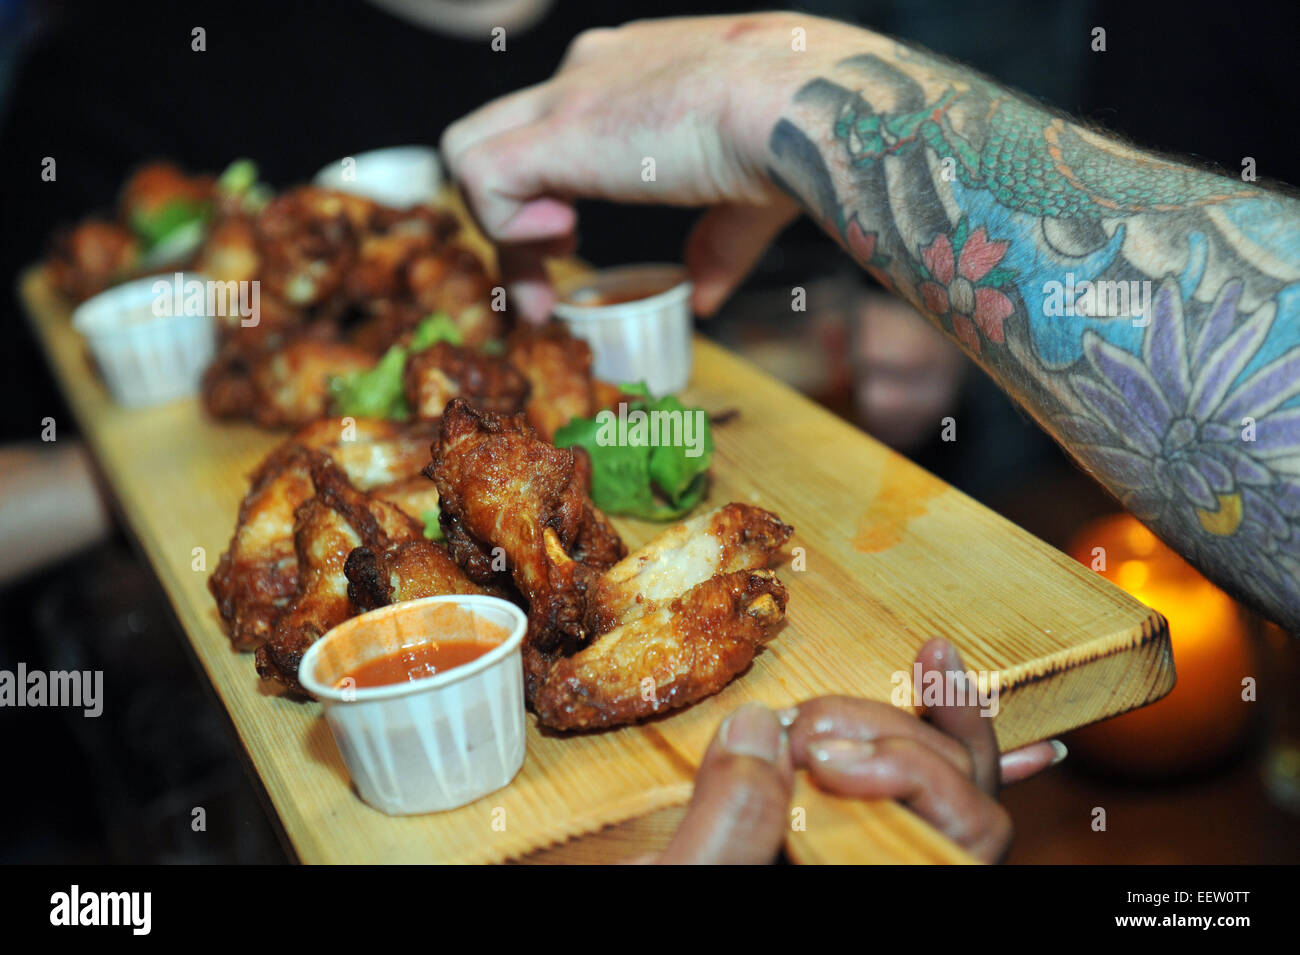 Chicken is served on a wooden platter to a guest with a completely tattooed arm. Stock Photo